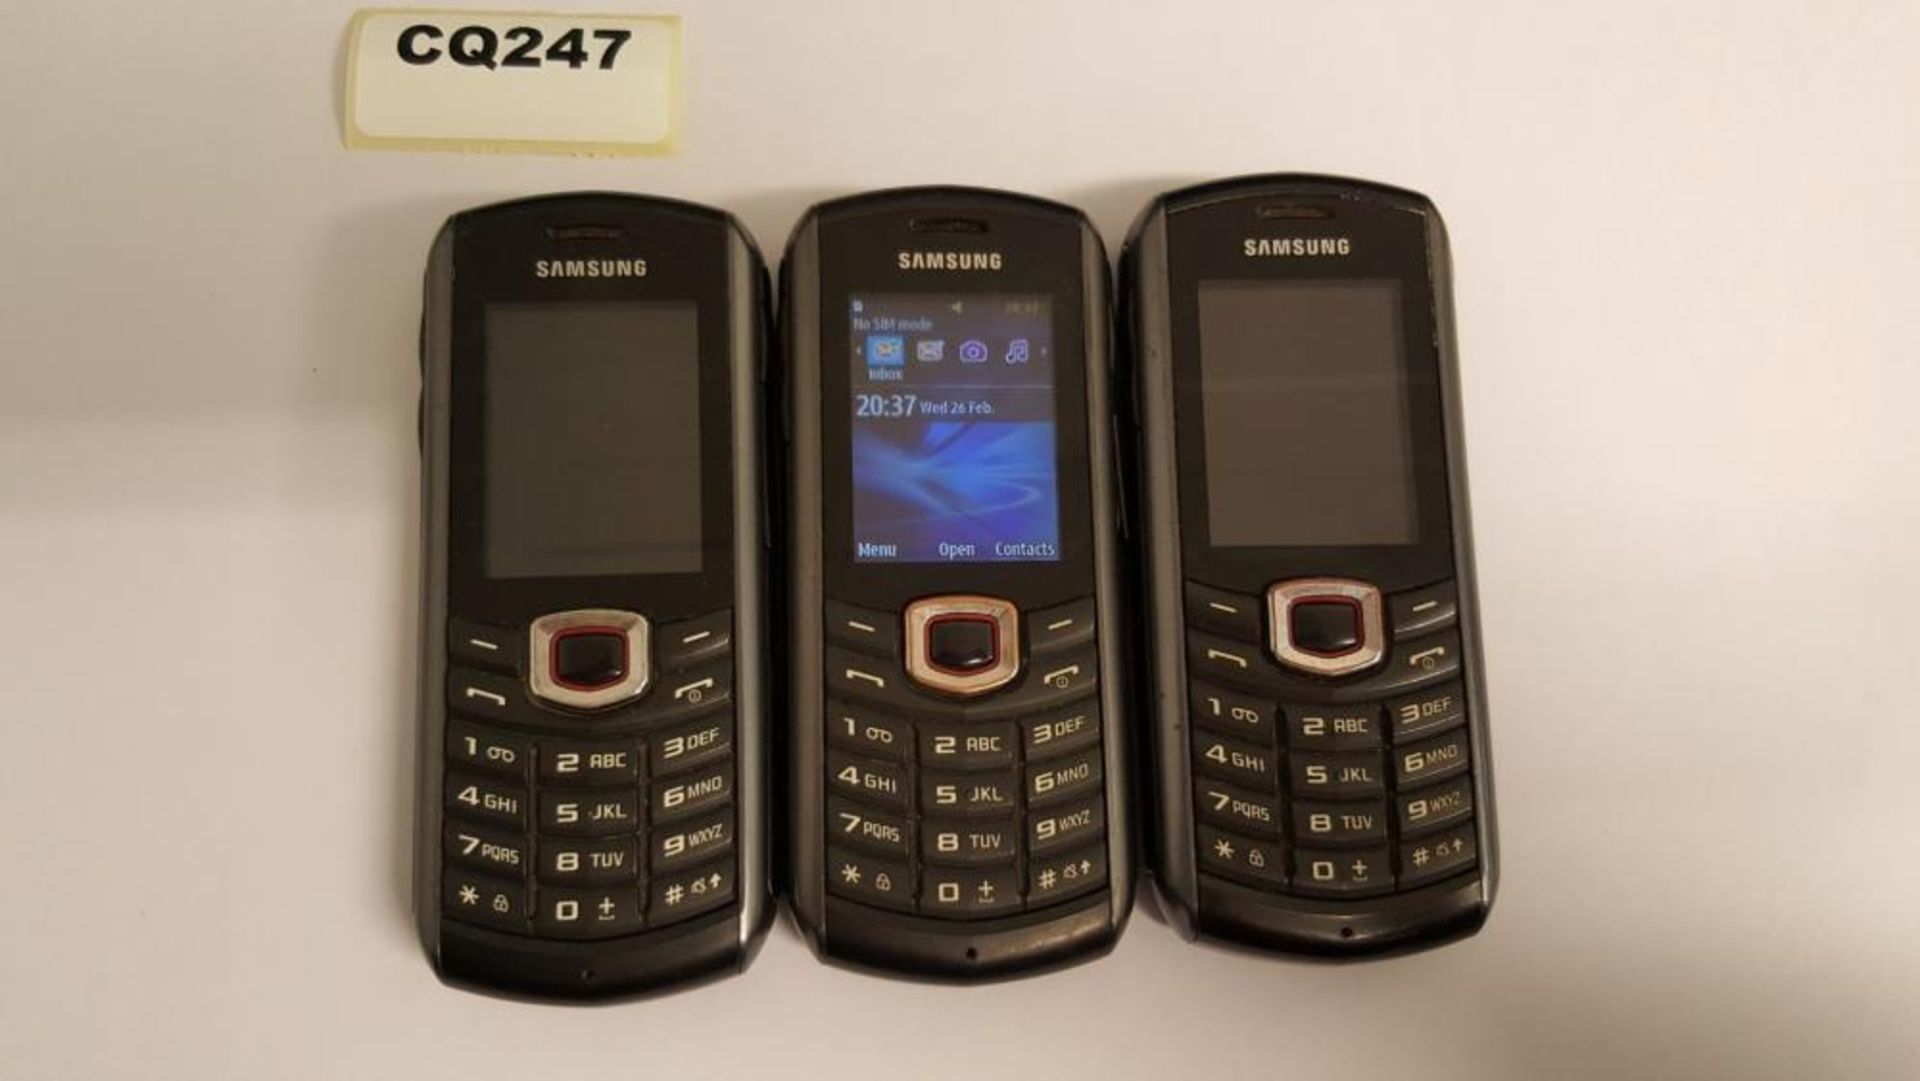 3 x Samsung GT B2710 Mobile Phone ( Have Been Turn On And Factory Reset) - Ref CQ247 - CL011 - Locat